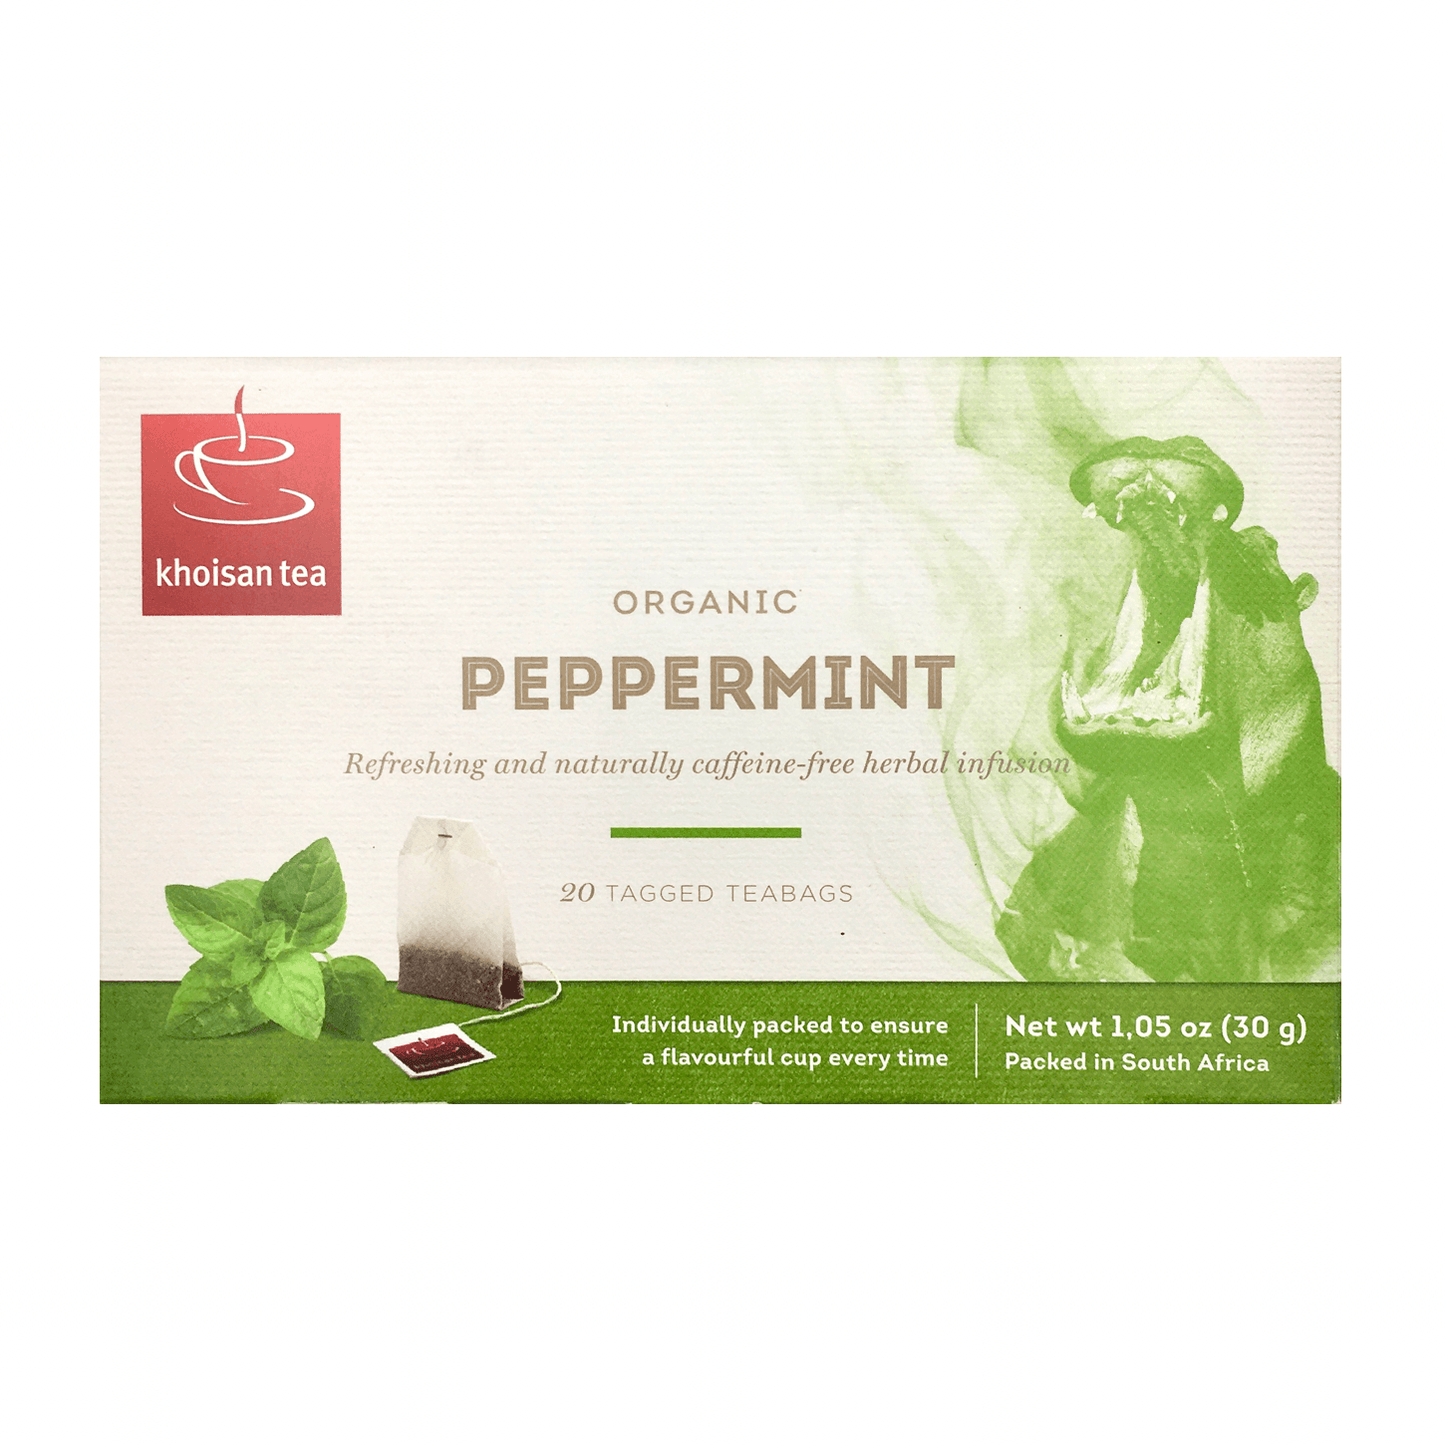 Organic Peppermint Tea 40g 20 Bags - Wildsprout